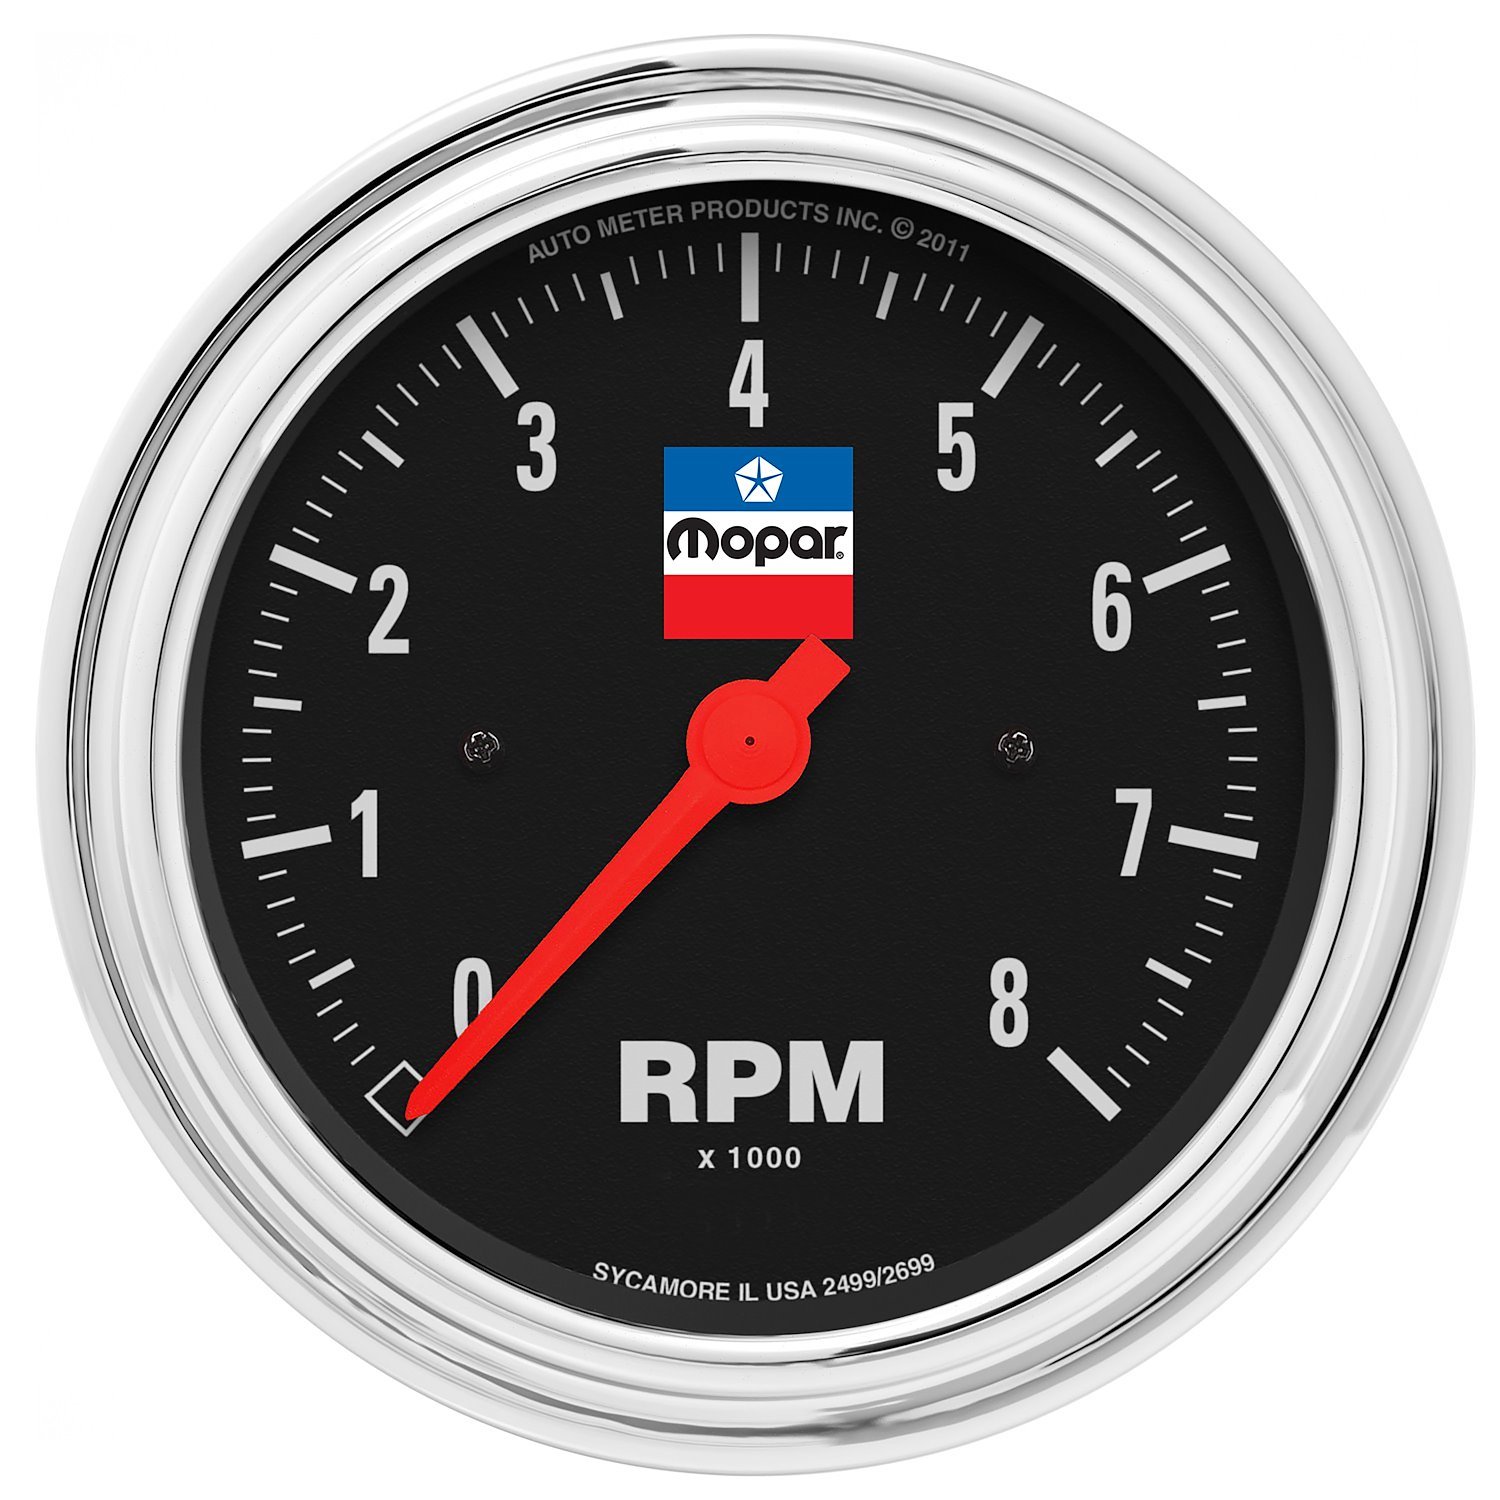 Officially-Licensed Mopar Classic In-Dash Tachometer 3 3/8 in. Electrical (Full Sweep)  - 0-8000 rpm